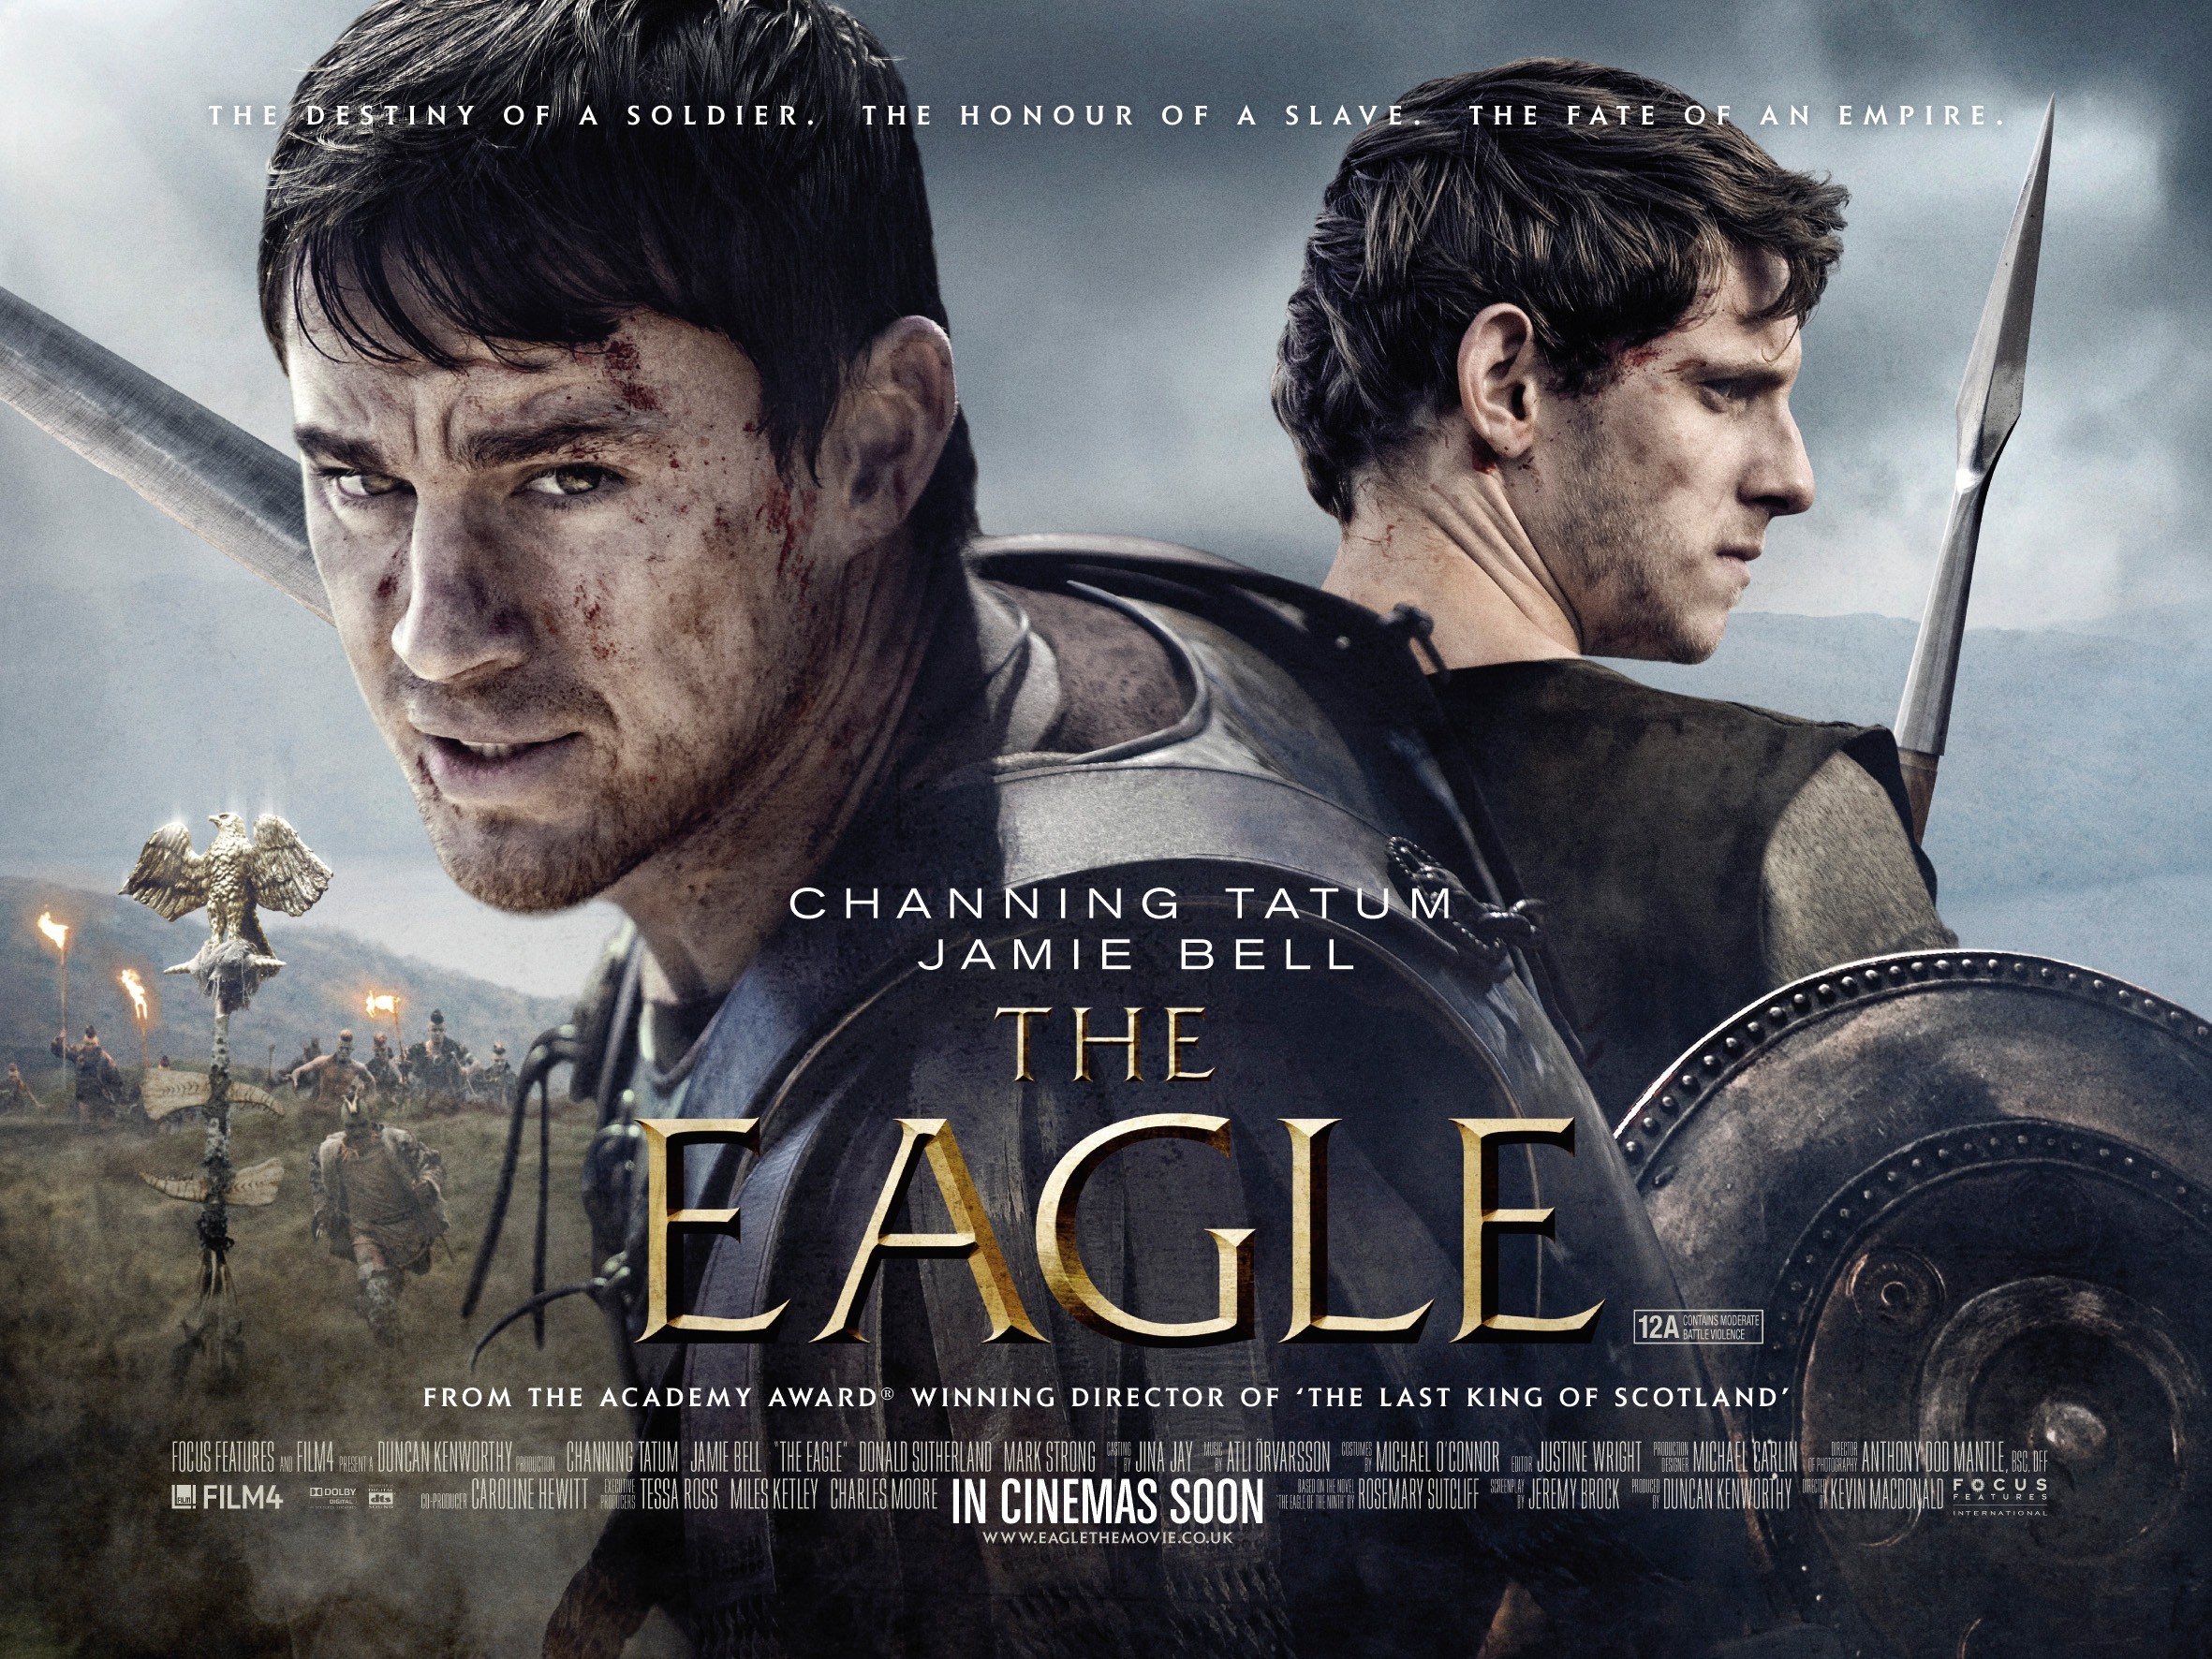 Mega Sized Movie Poster Image for The Eagle (#2 of 2)